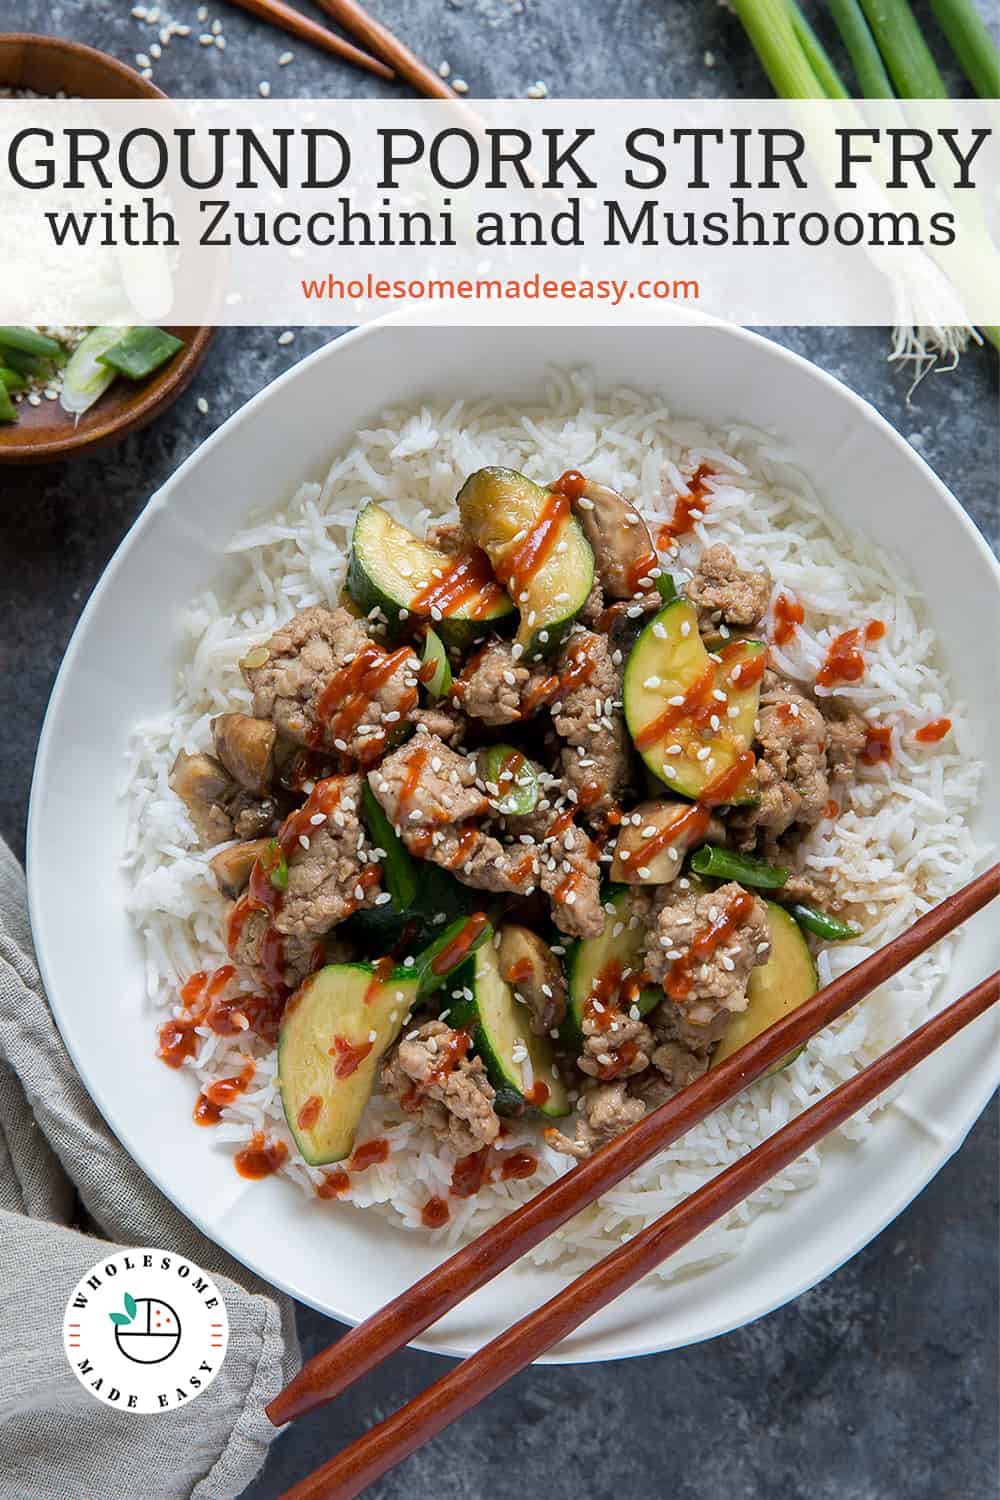 Ground Pork Stir Fry over rice in a white bowl with chopsticks with text overlay.